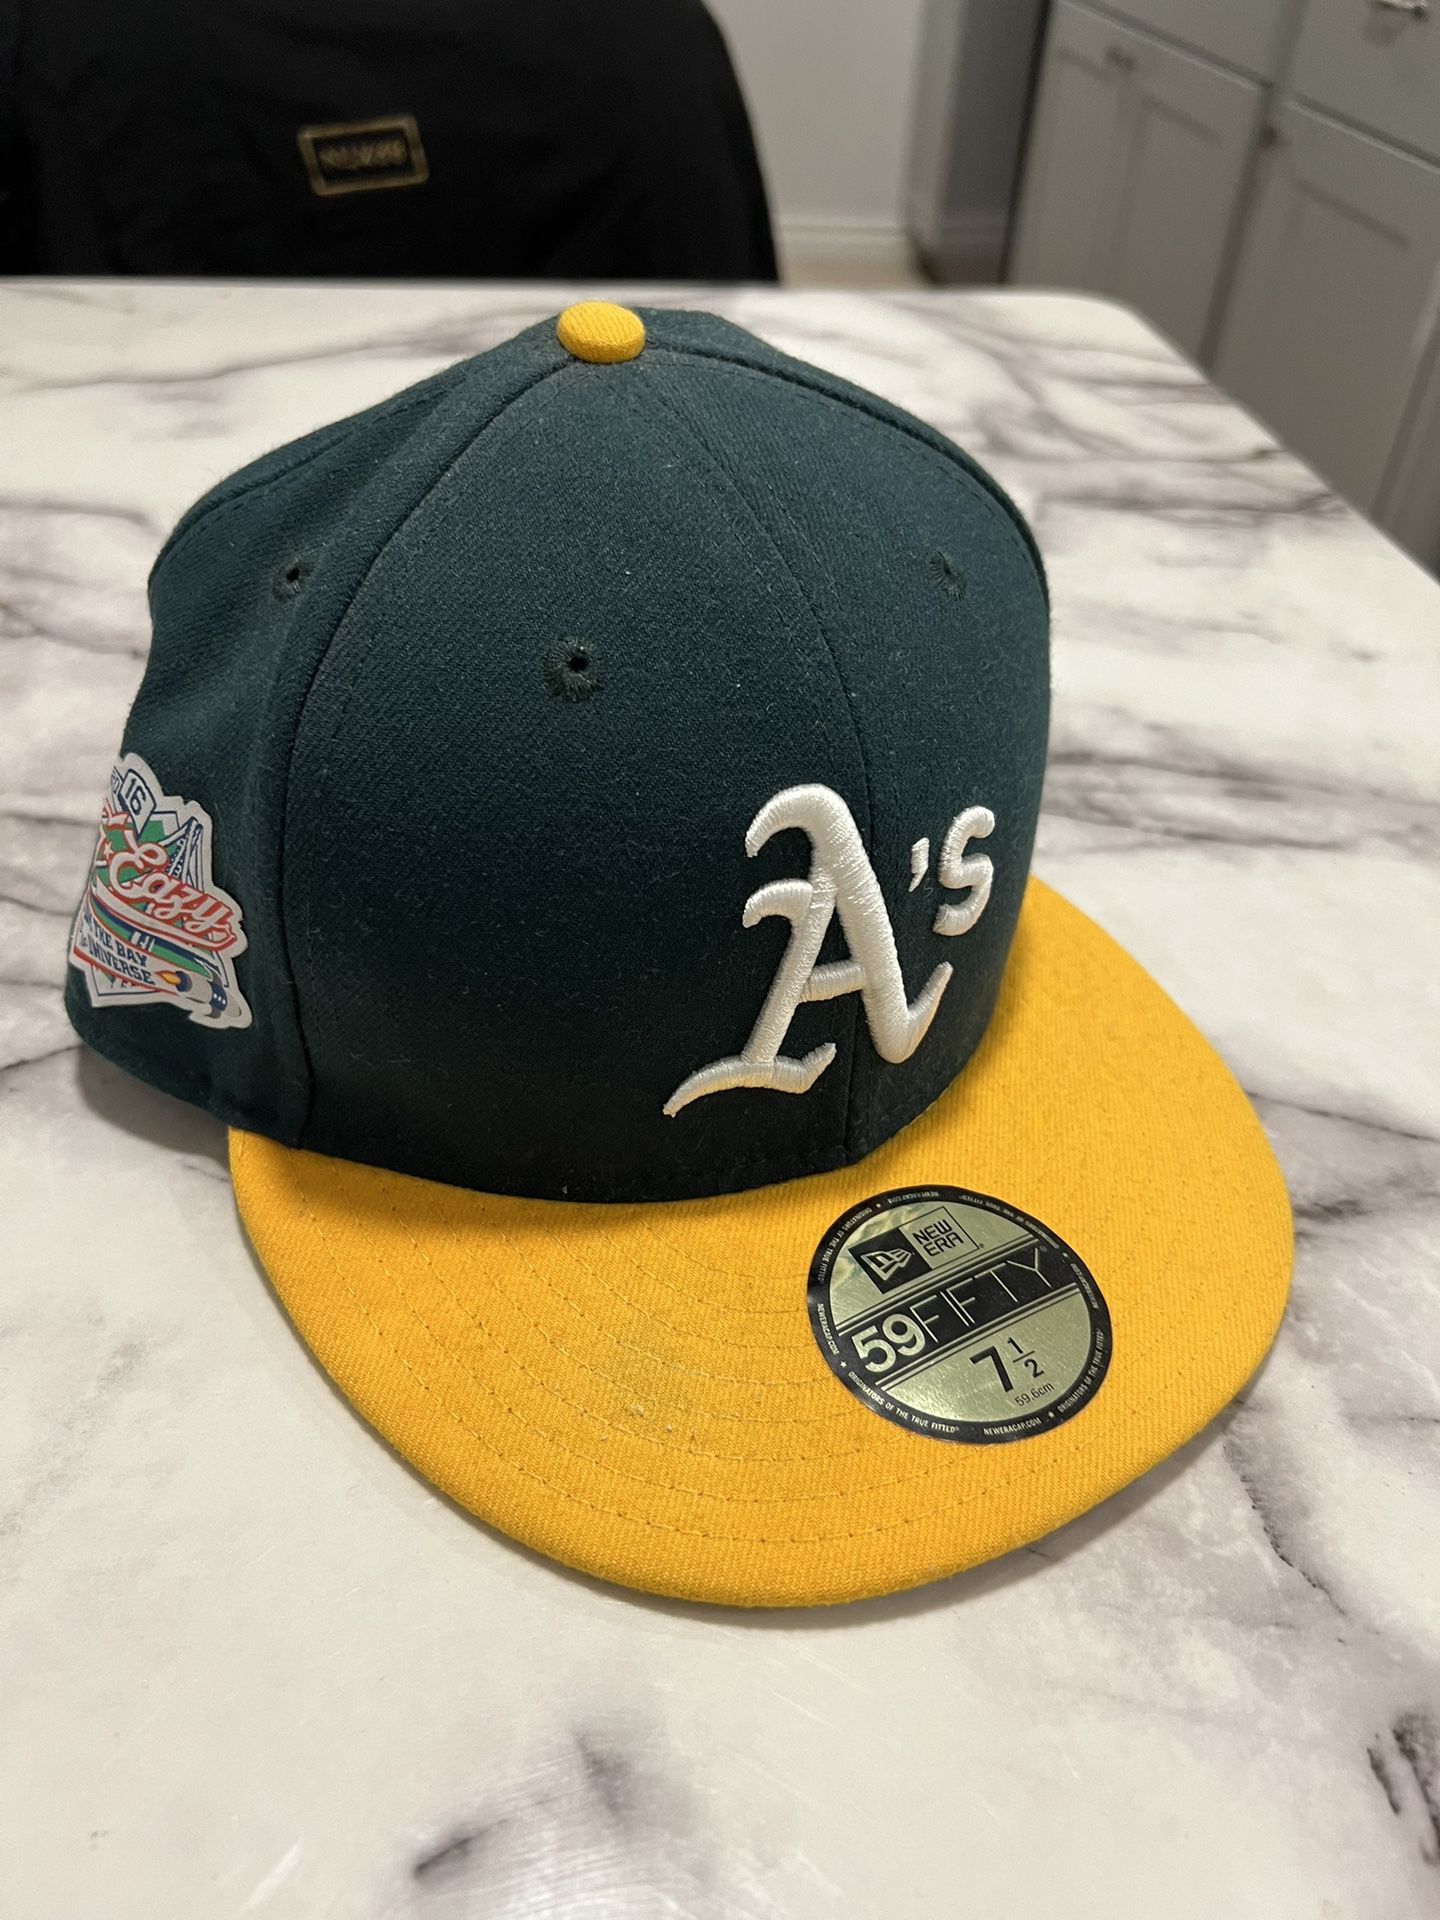 New Era Oakland A’s Fitted Hat Size 7 1/2